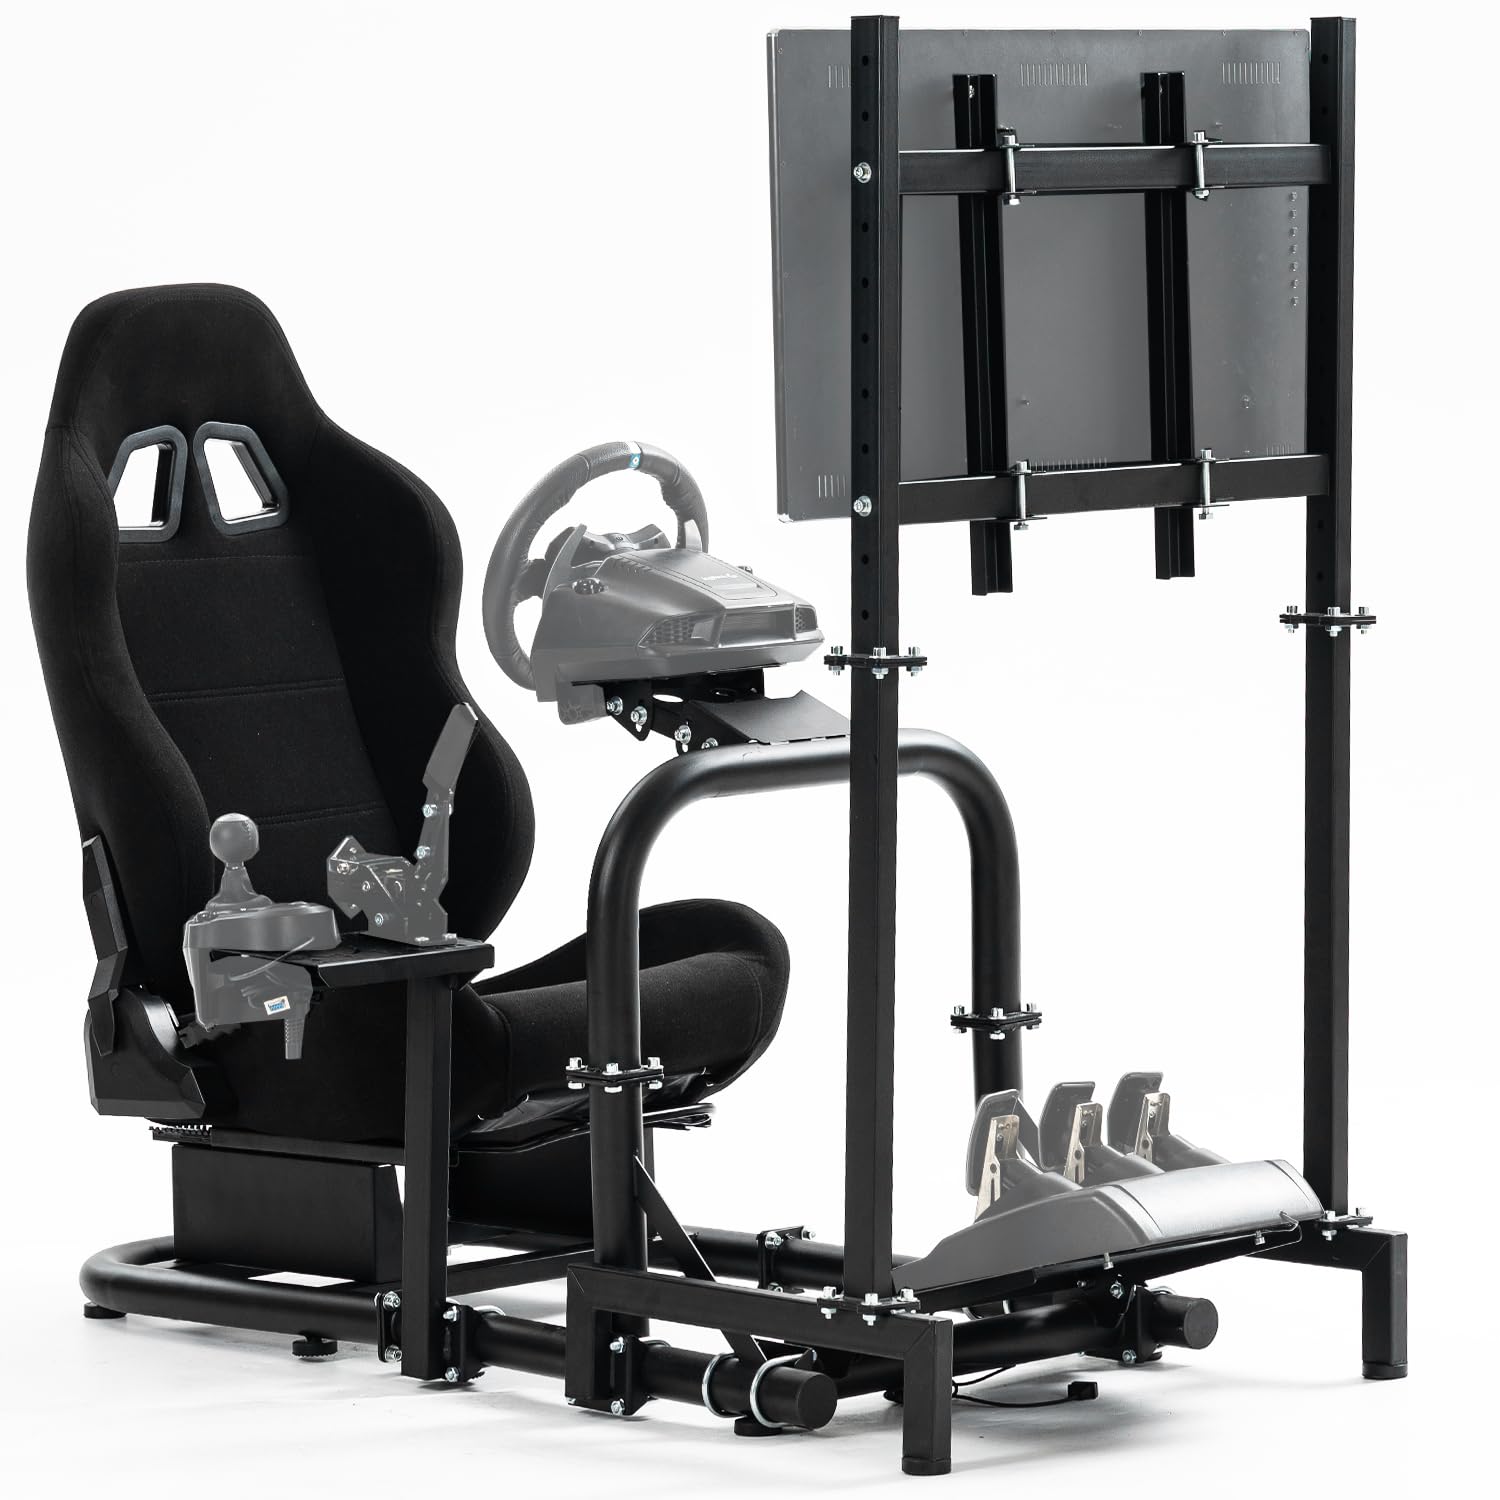 Minneer Racing Simulator Cockpit with Seat TV Stand Fit Logitech  Thrustmaster